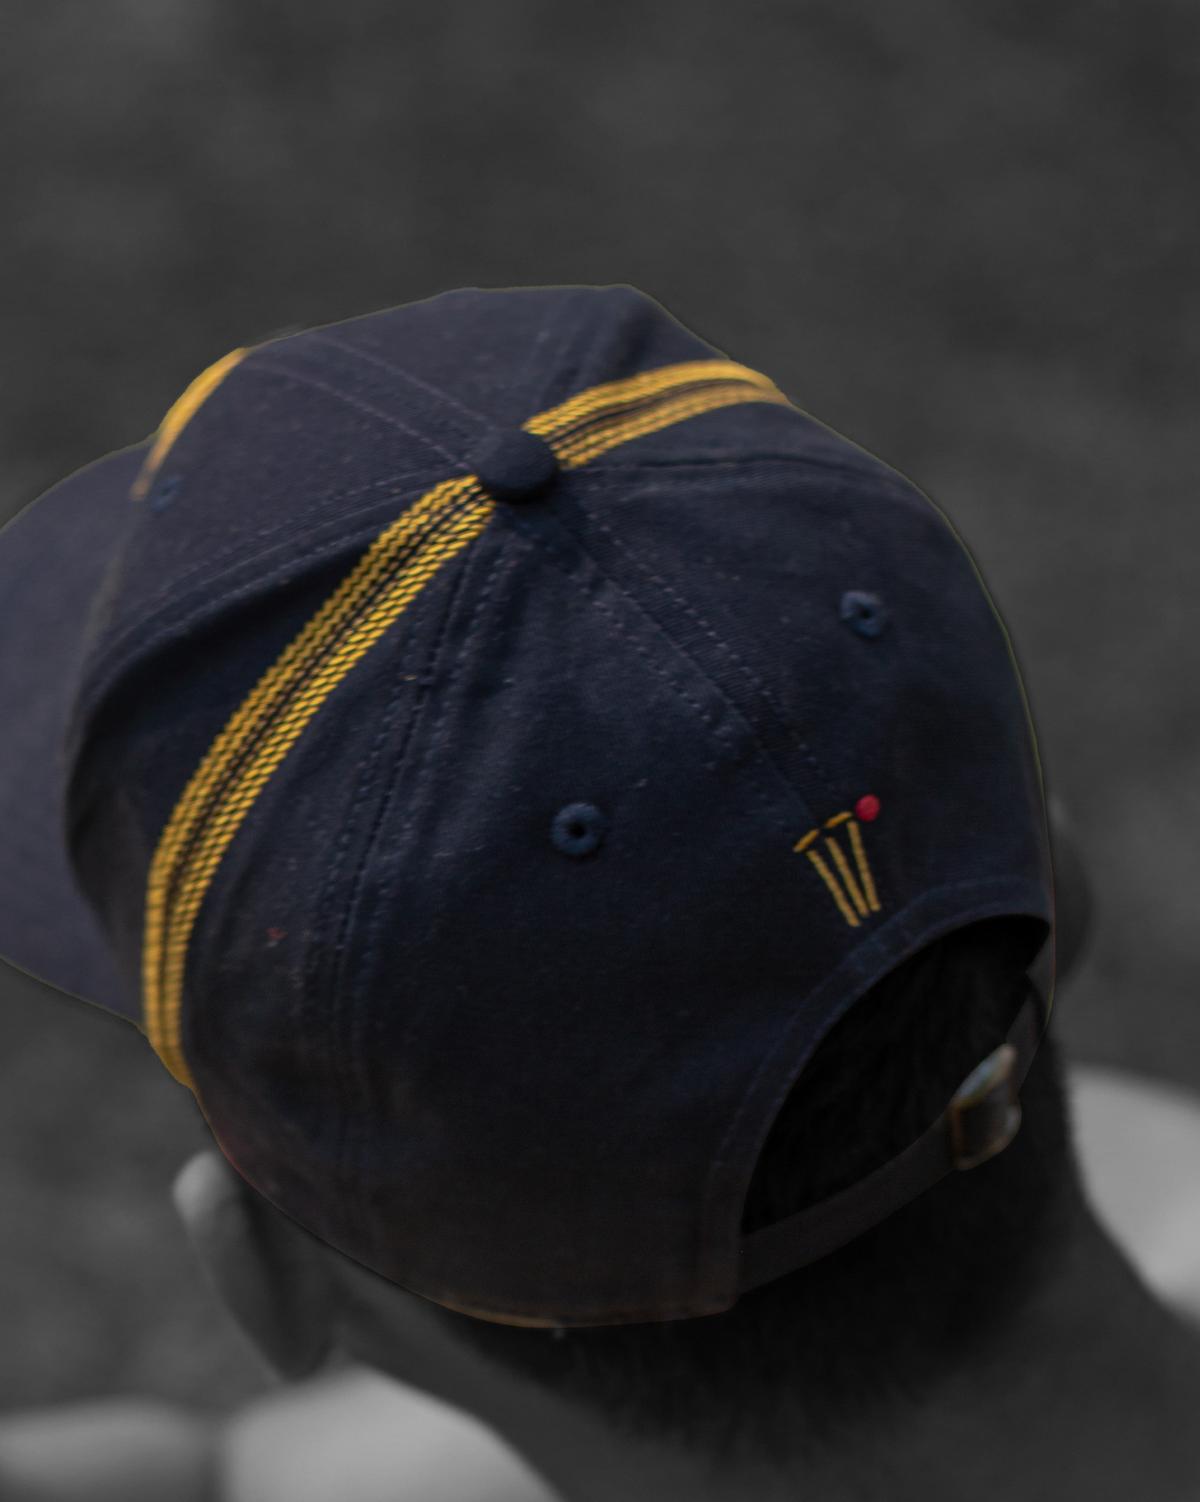 The collection is made up of 100% cotton knitwear and 100% cotton twill fabric for caps